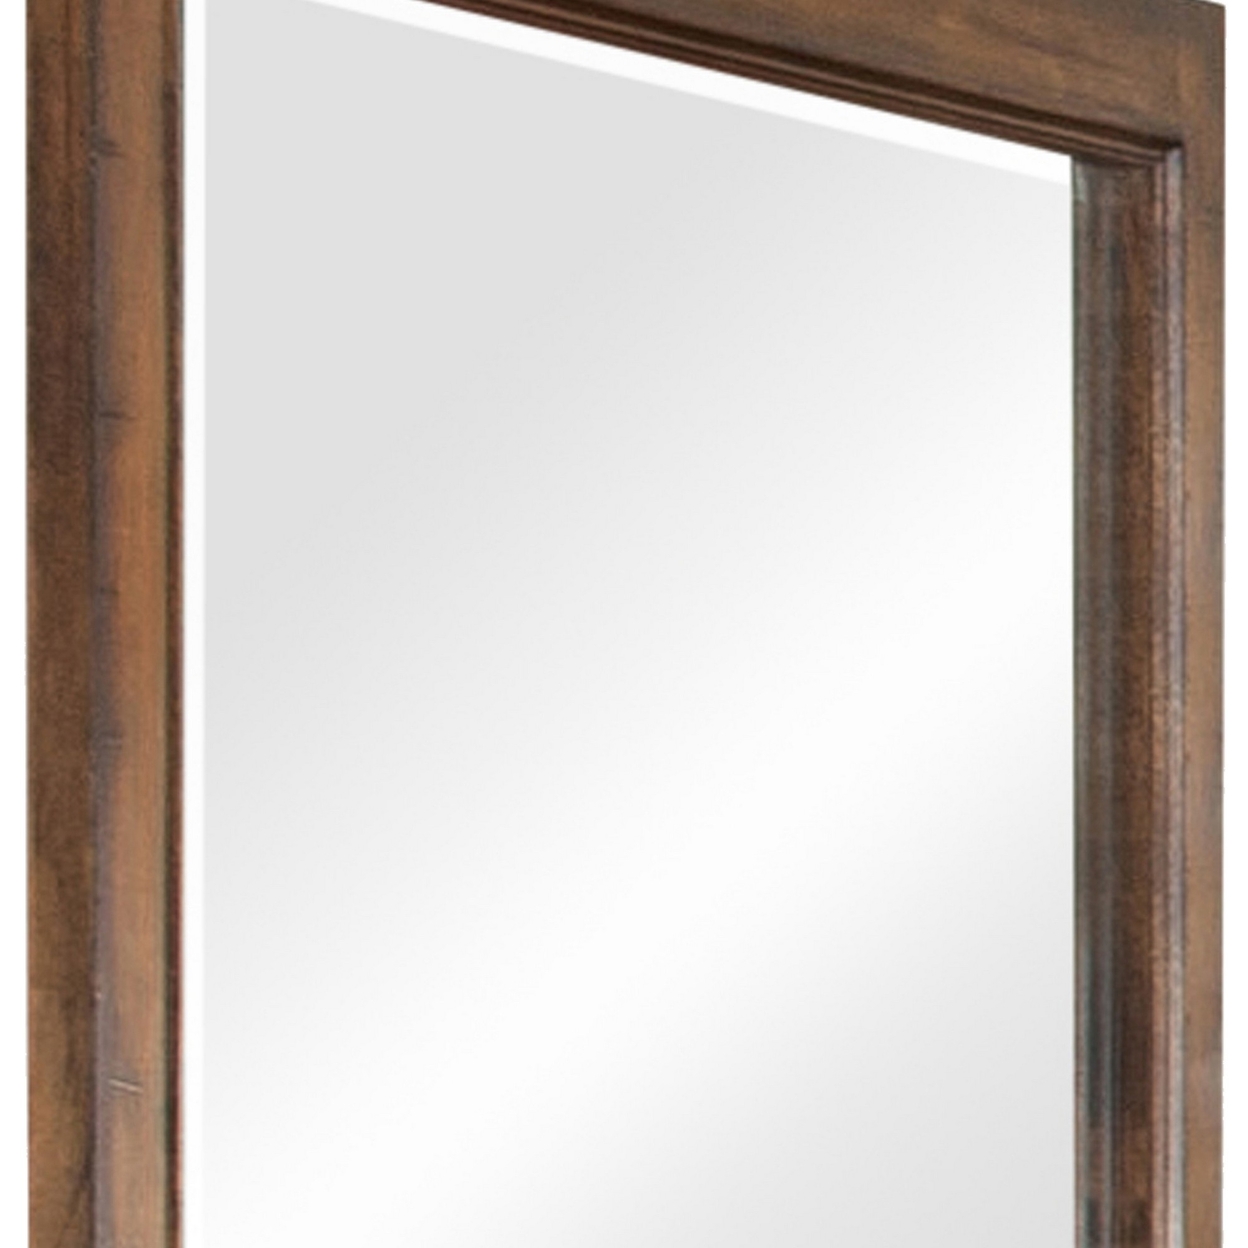 Wooden Frame Mirror With Rough Hewn Saw Texture, Rustic Brown- Saltoro Sherpi